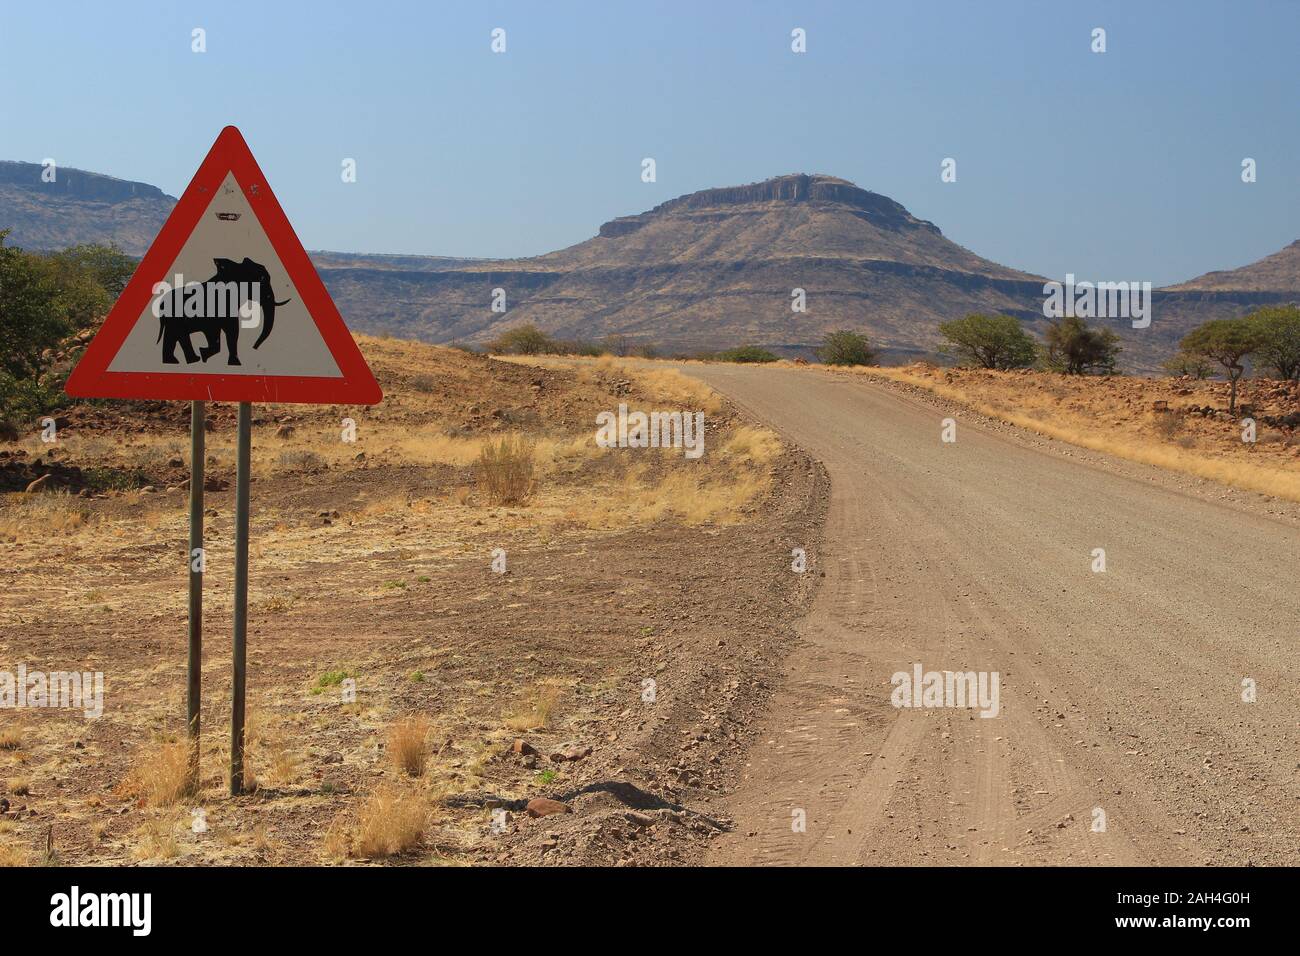 Warning sign in Namibia: elephant crossing Stock Photo